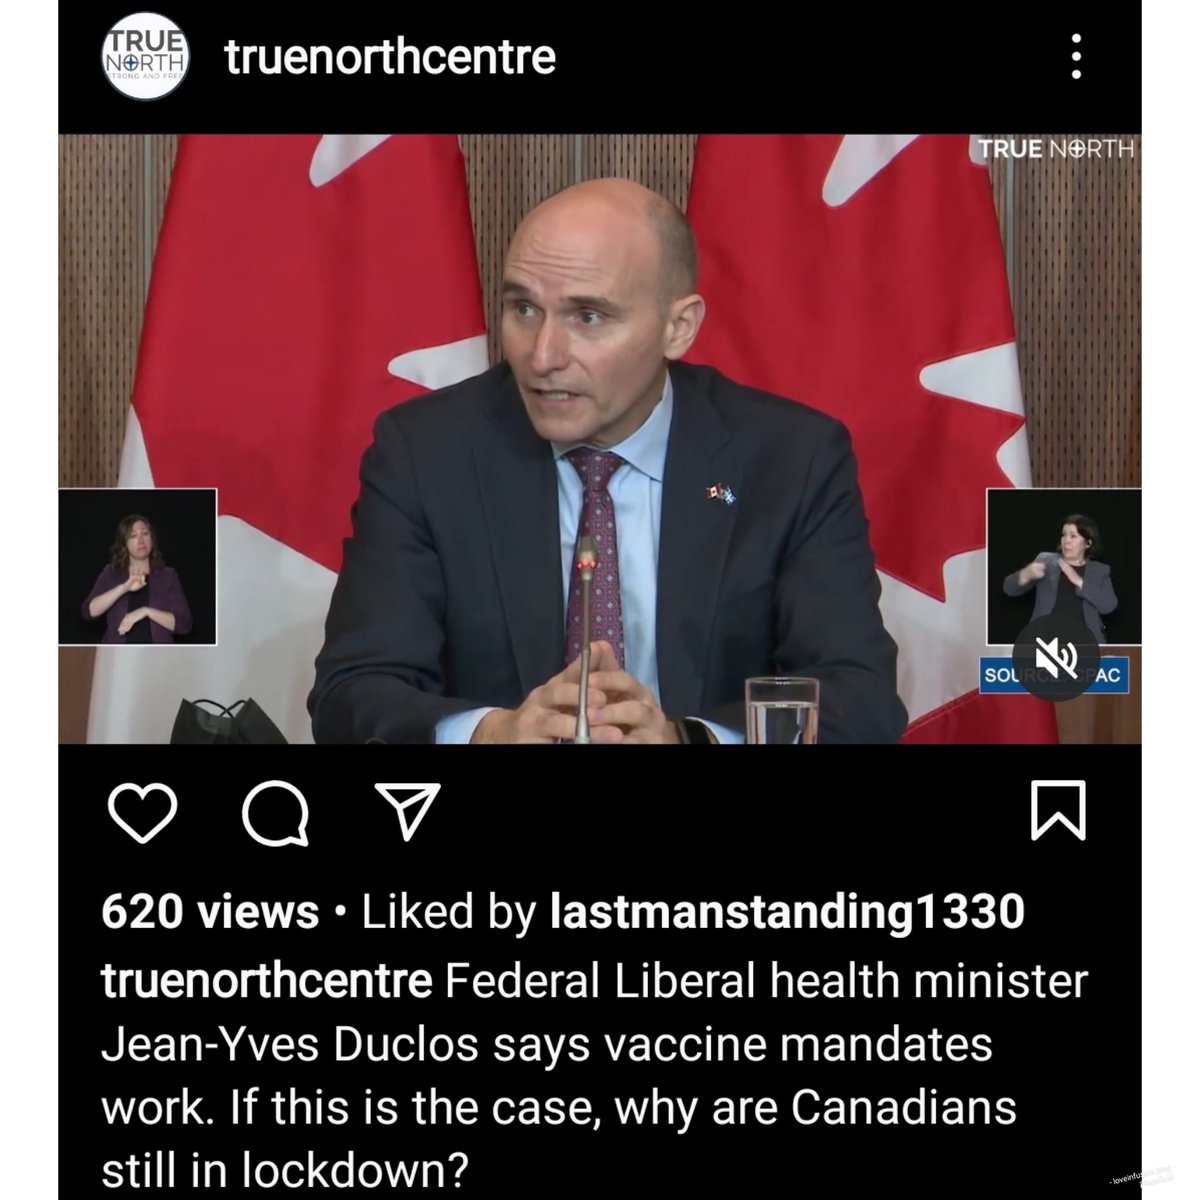 Question for #JeanYvesDuclos & #JustinTrudeau 🤥 If 'they work!' - why are we in Lockdowns & Curfews?? Bunch of FRAUDS. They either work, so we don't need Lockdowns or Curfews, OR we need them cuz they don't work = CAN'T have it both ways. Liars. #Charlatans #Canada #Trudeau 🤥